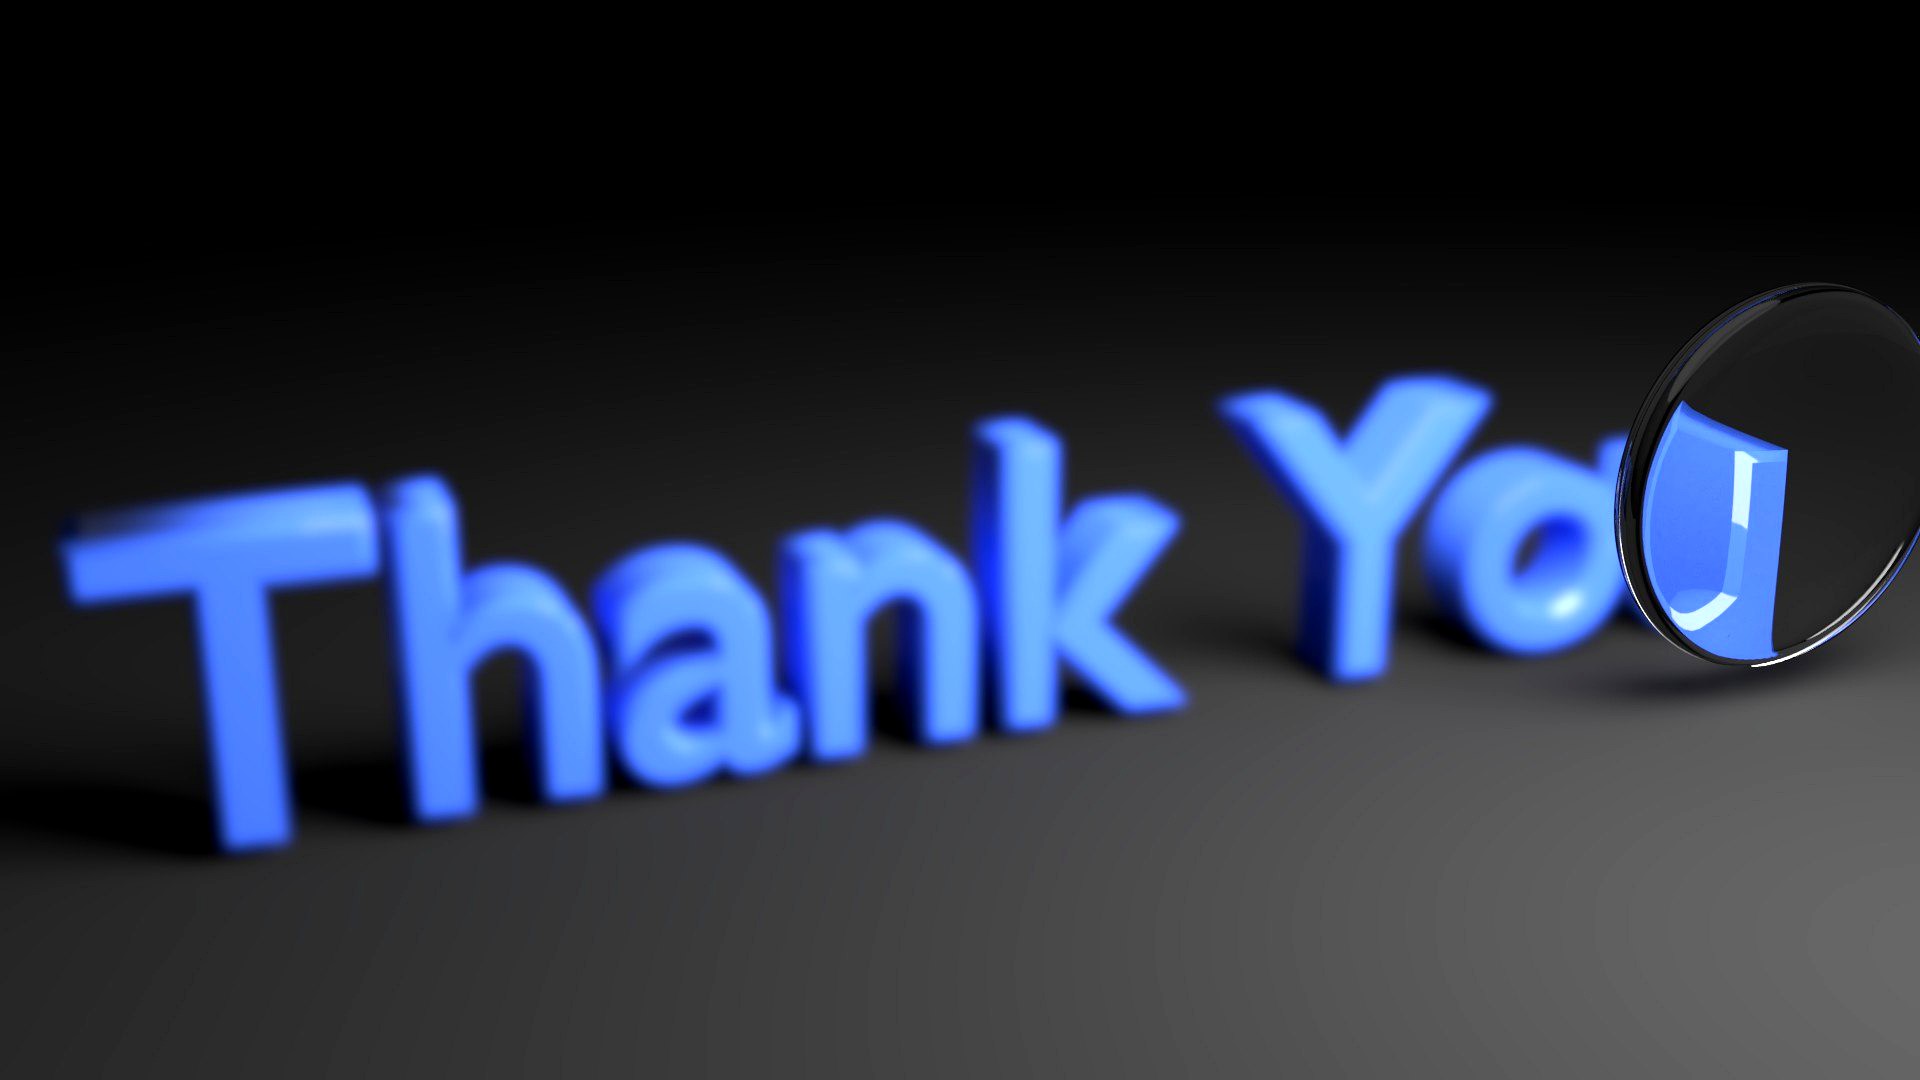 Focused Thank You Text Animation